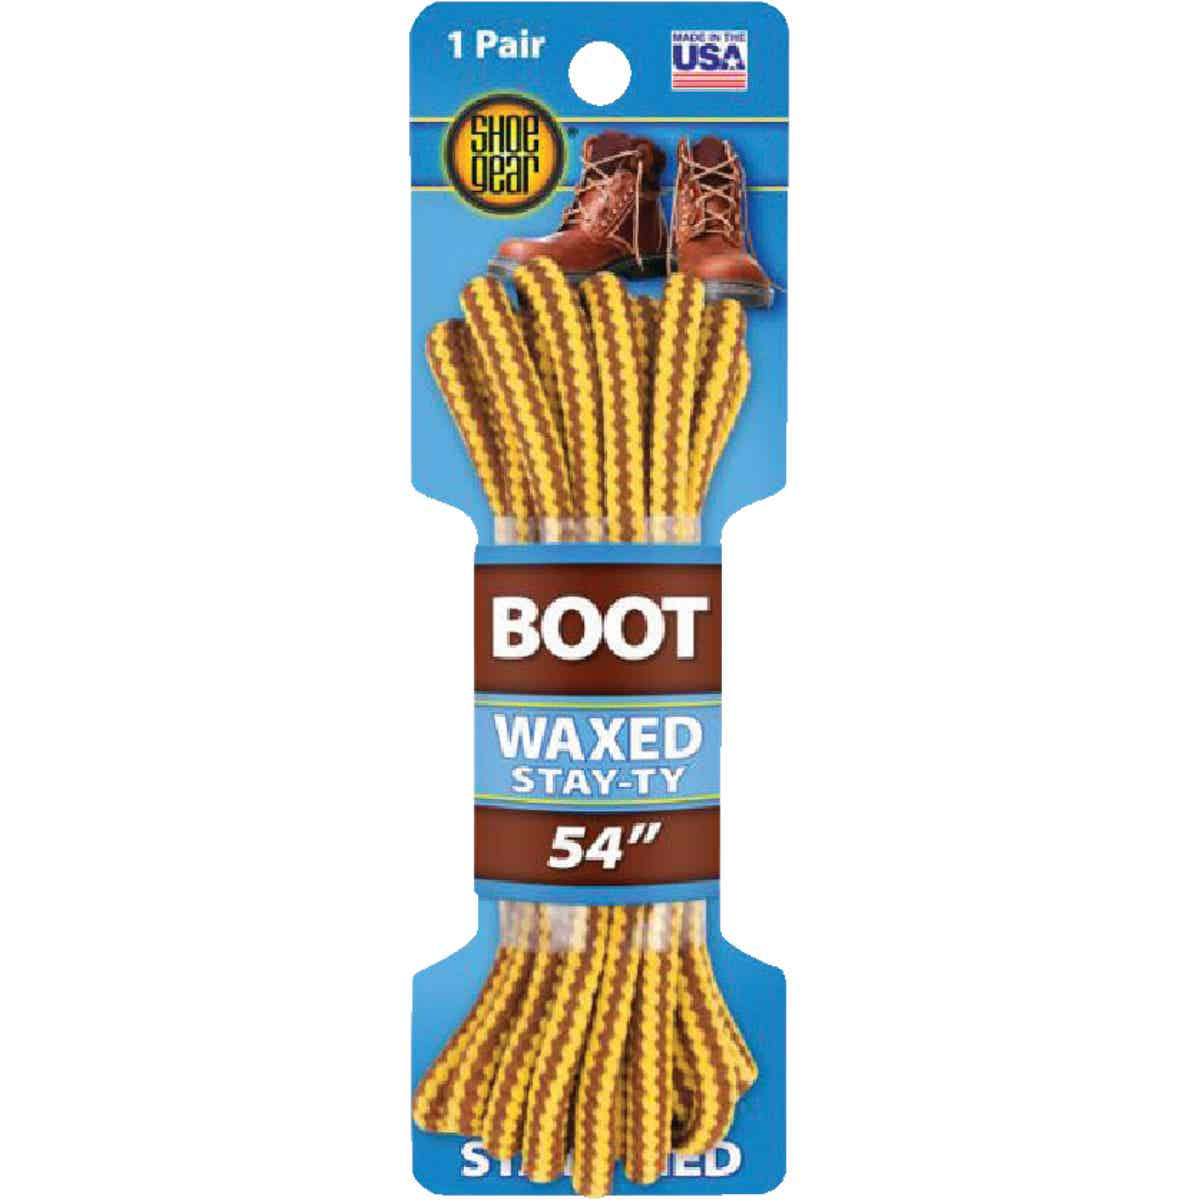 Shoe Gear 375112 Waxed Boot Laces 54" Brwn/gold